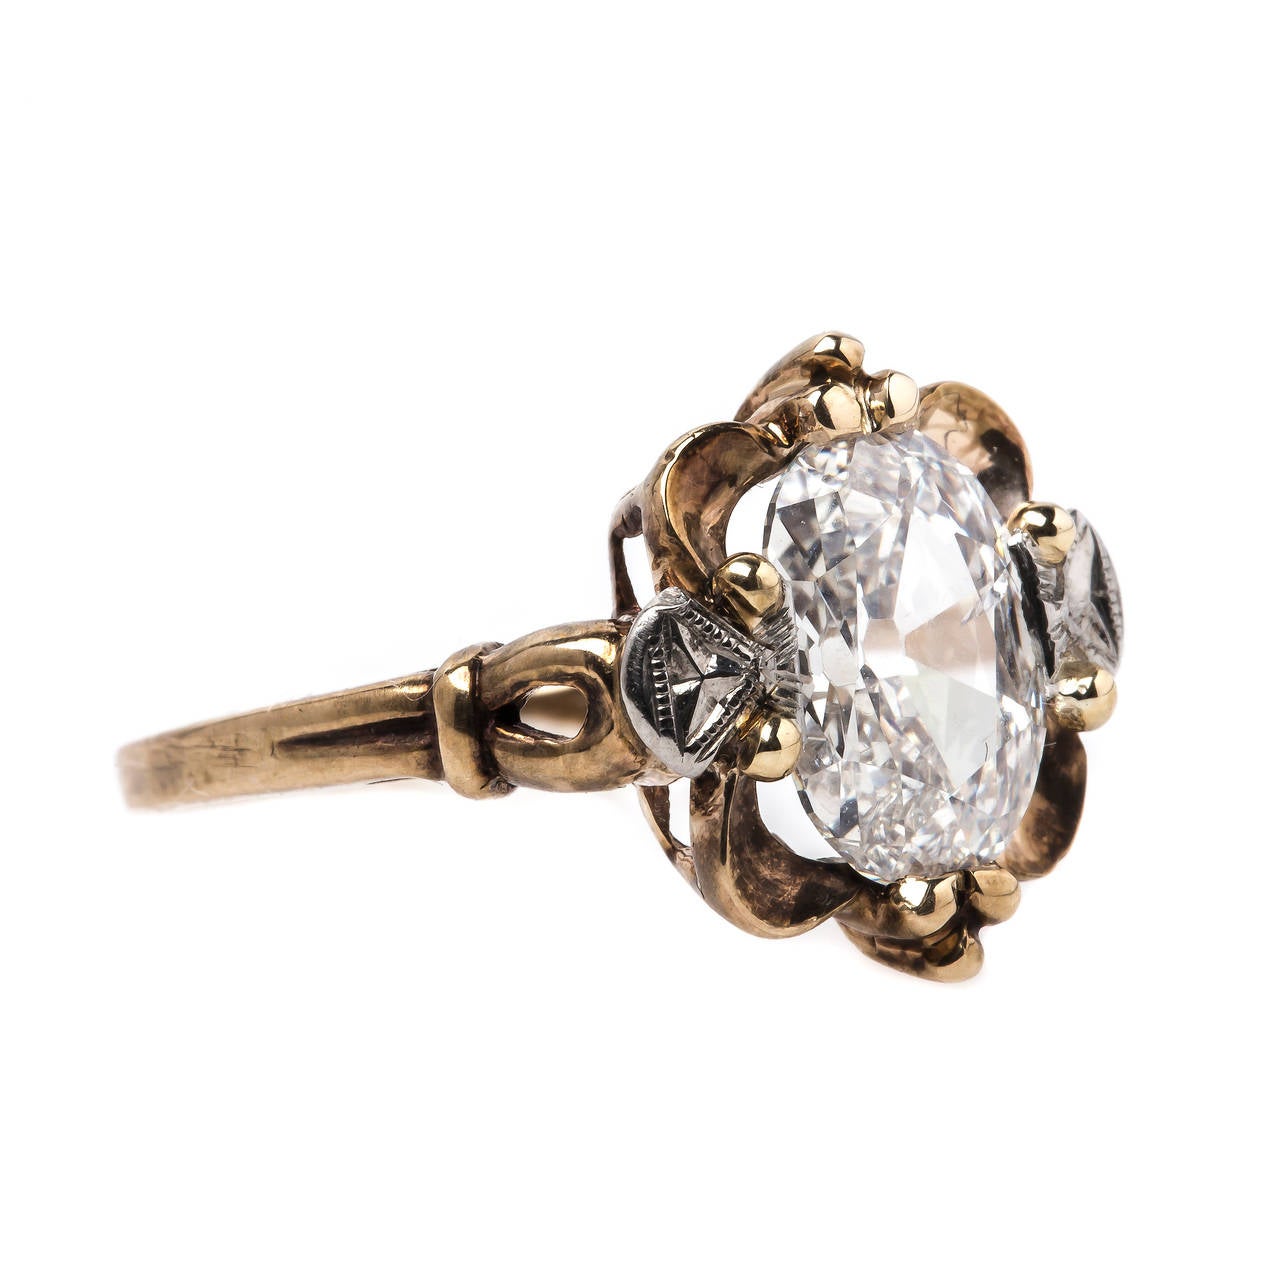 Carmel is a spectacular authentic Retro era (circa 1940) 10k yellow and white gold ring centering an unusual 1.69ct EGL certified Oval Modified Brilliant cut diamond graded H color and SI2 clarity. The unique center diamond is enhanced with decadent